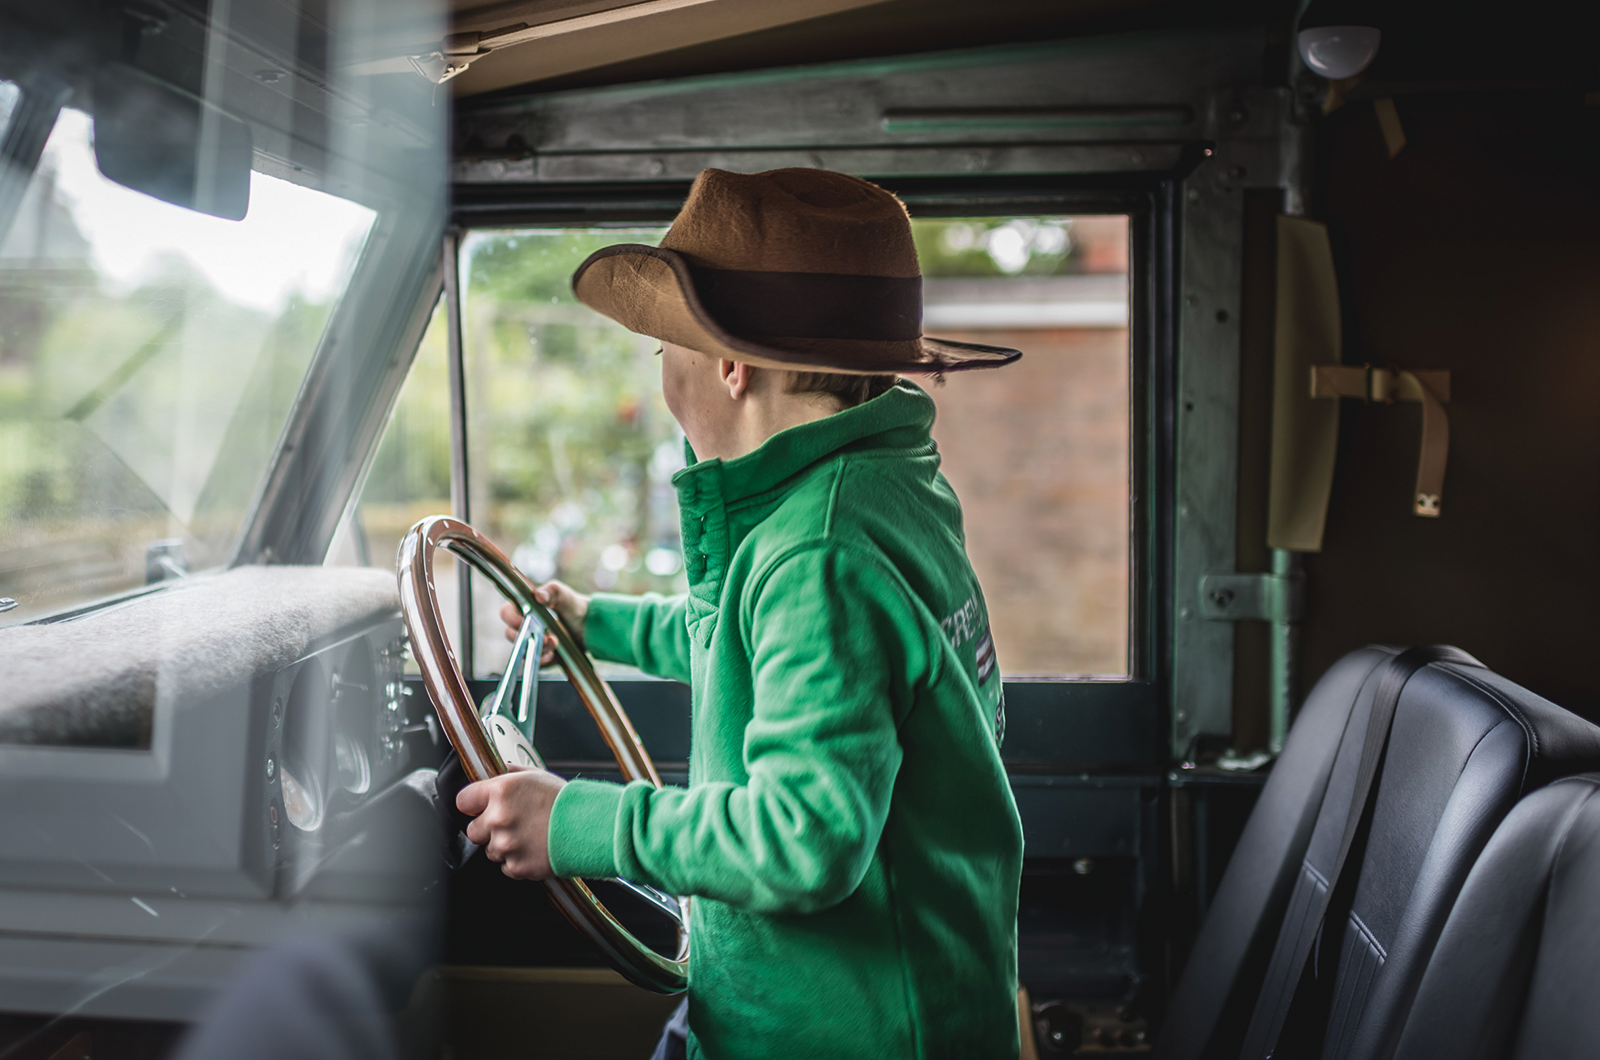 Classic & Sports Car – Your classic: Land-Rover Series III